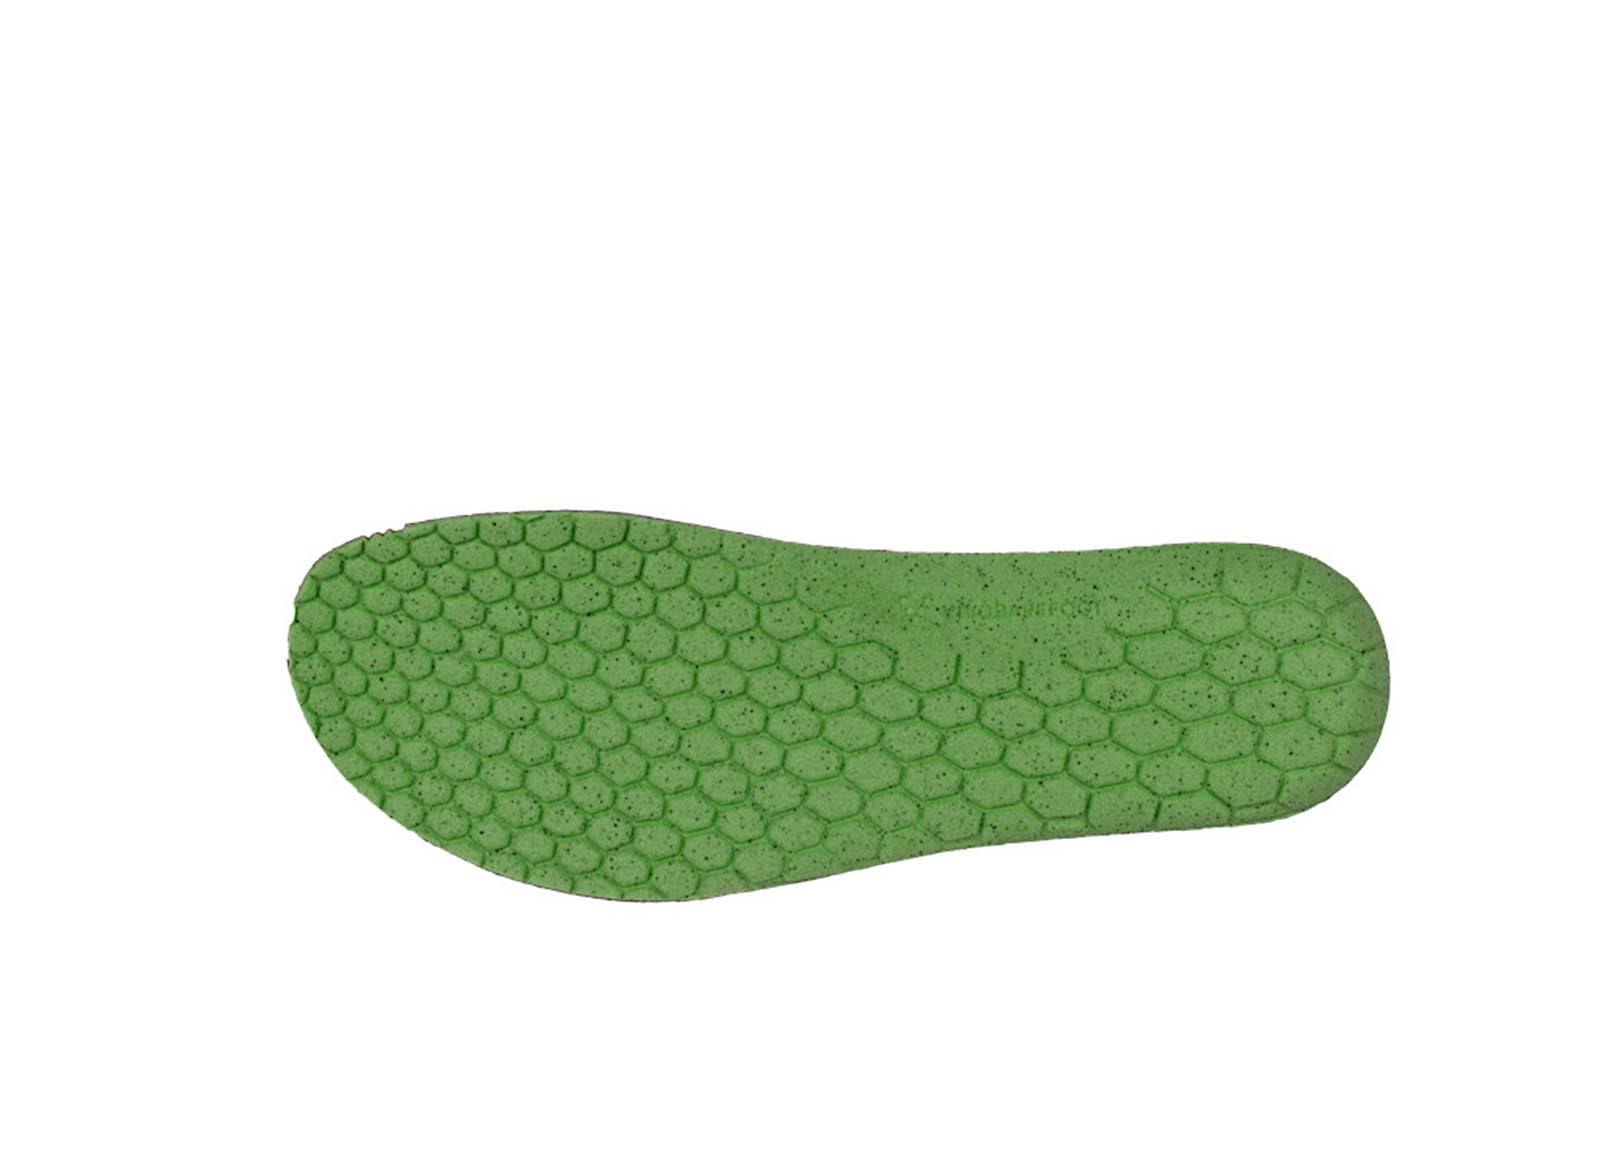 vivobarefoot insole slipping - OFF-56% >Free Delivery